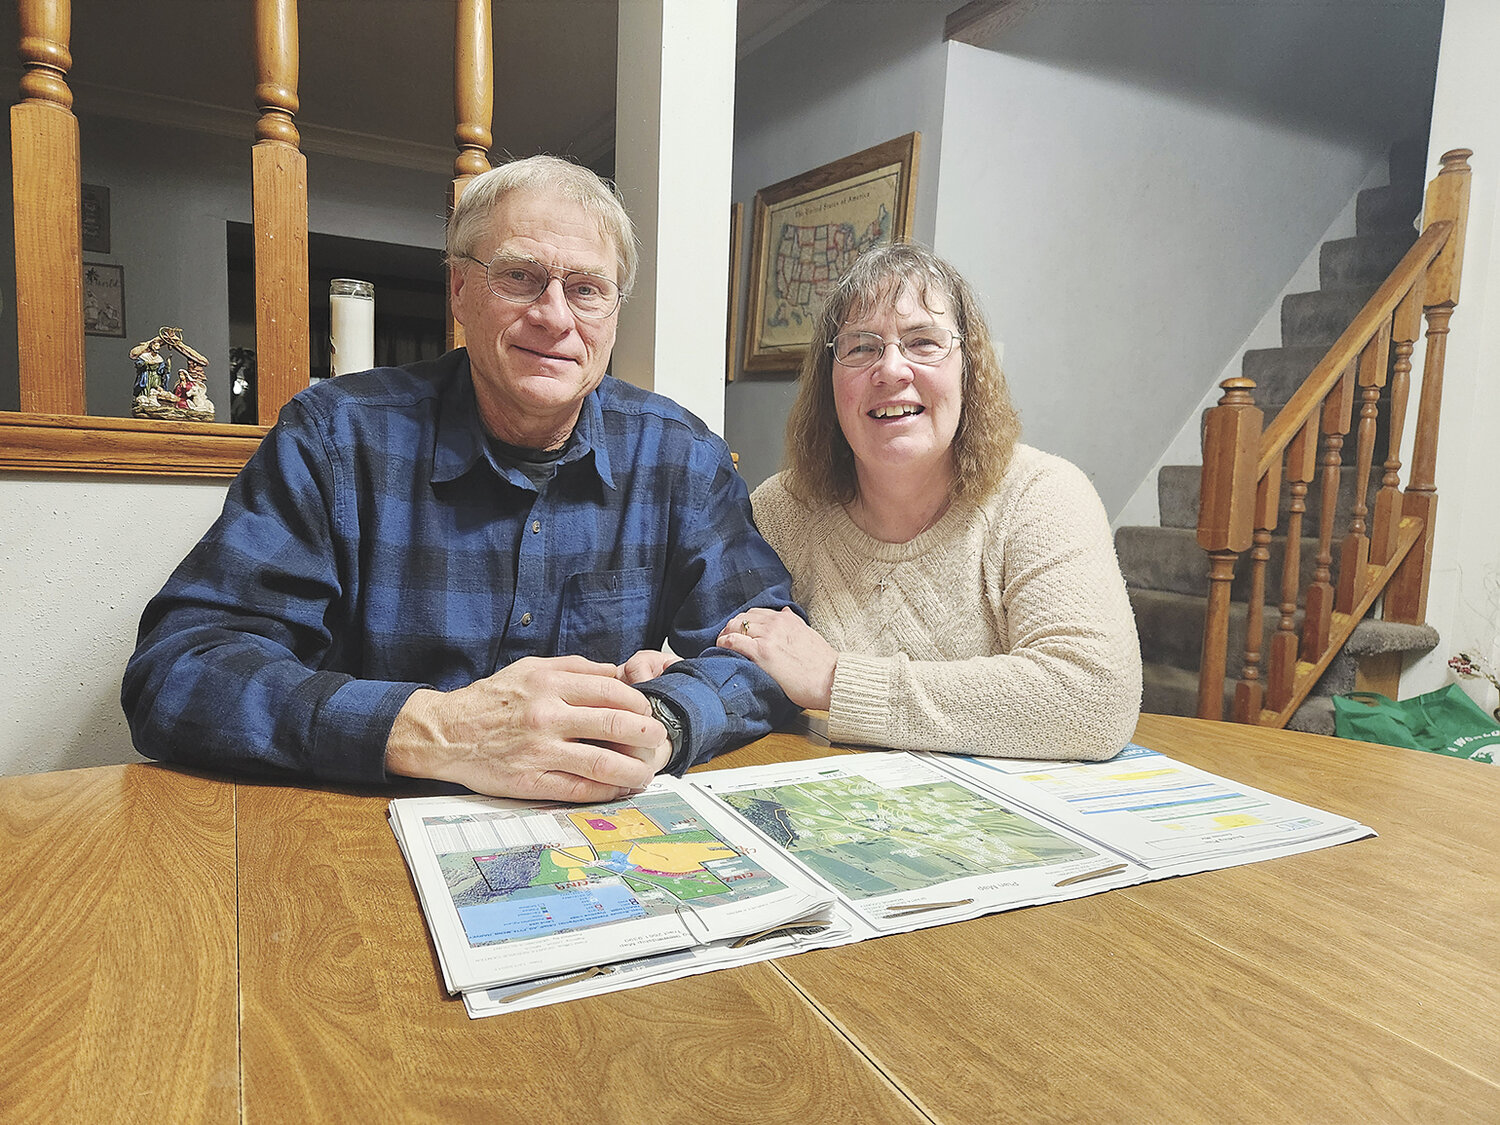 Harvey and Jackie Menn look over their conservation plans Jan. 23 at their farm near Norwalk, Wisconsin. The Menns received the Monroe County Conservation Farmer of the Year award Jan. 27.